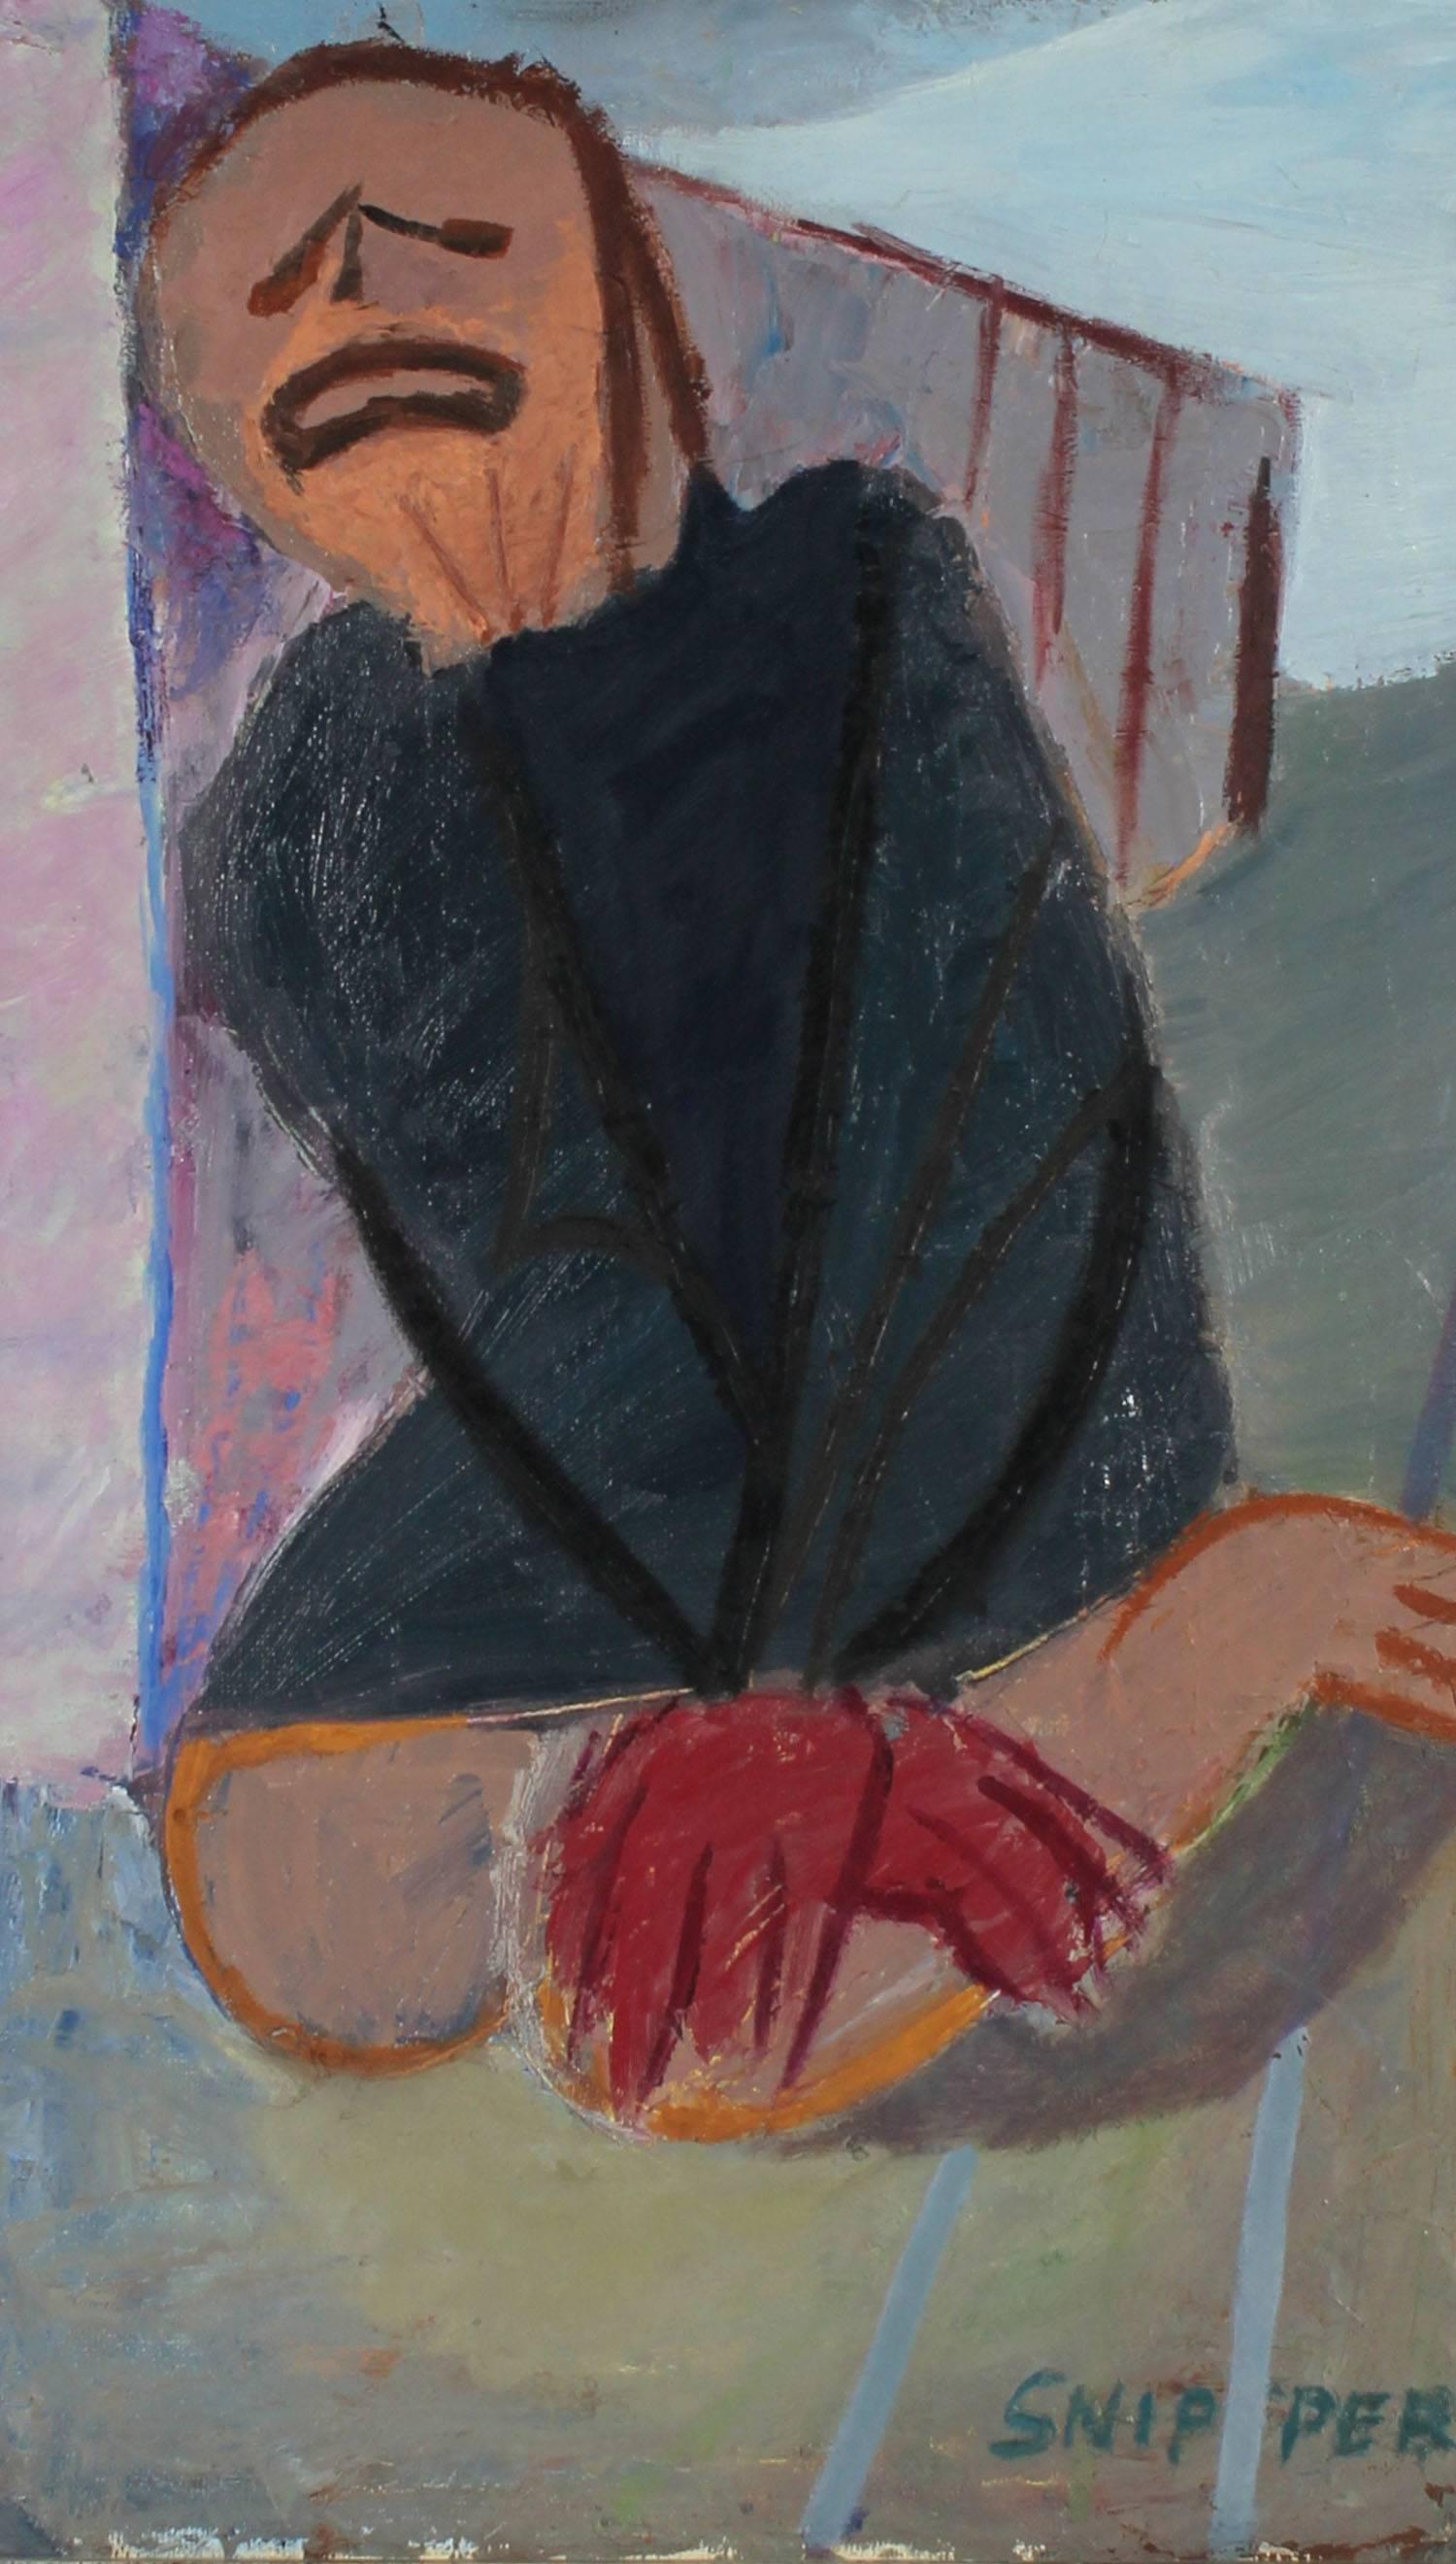 This 1940-50s oil on masonite figure is by San Francisco North Beach artist Martin Snipper (1914-2008).  Snipper studied at the National Academy of Art In New York and exhibited at the San Francisco Art Museum's (later to become SFMOMA) annual